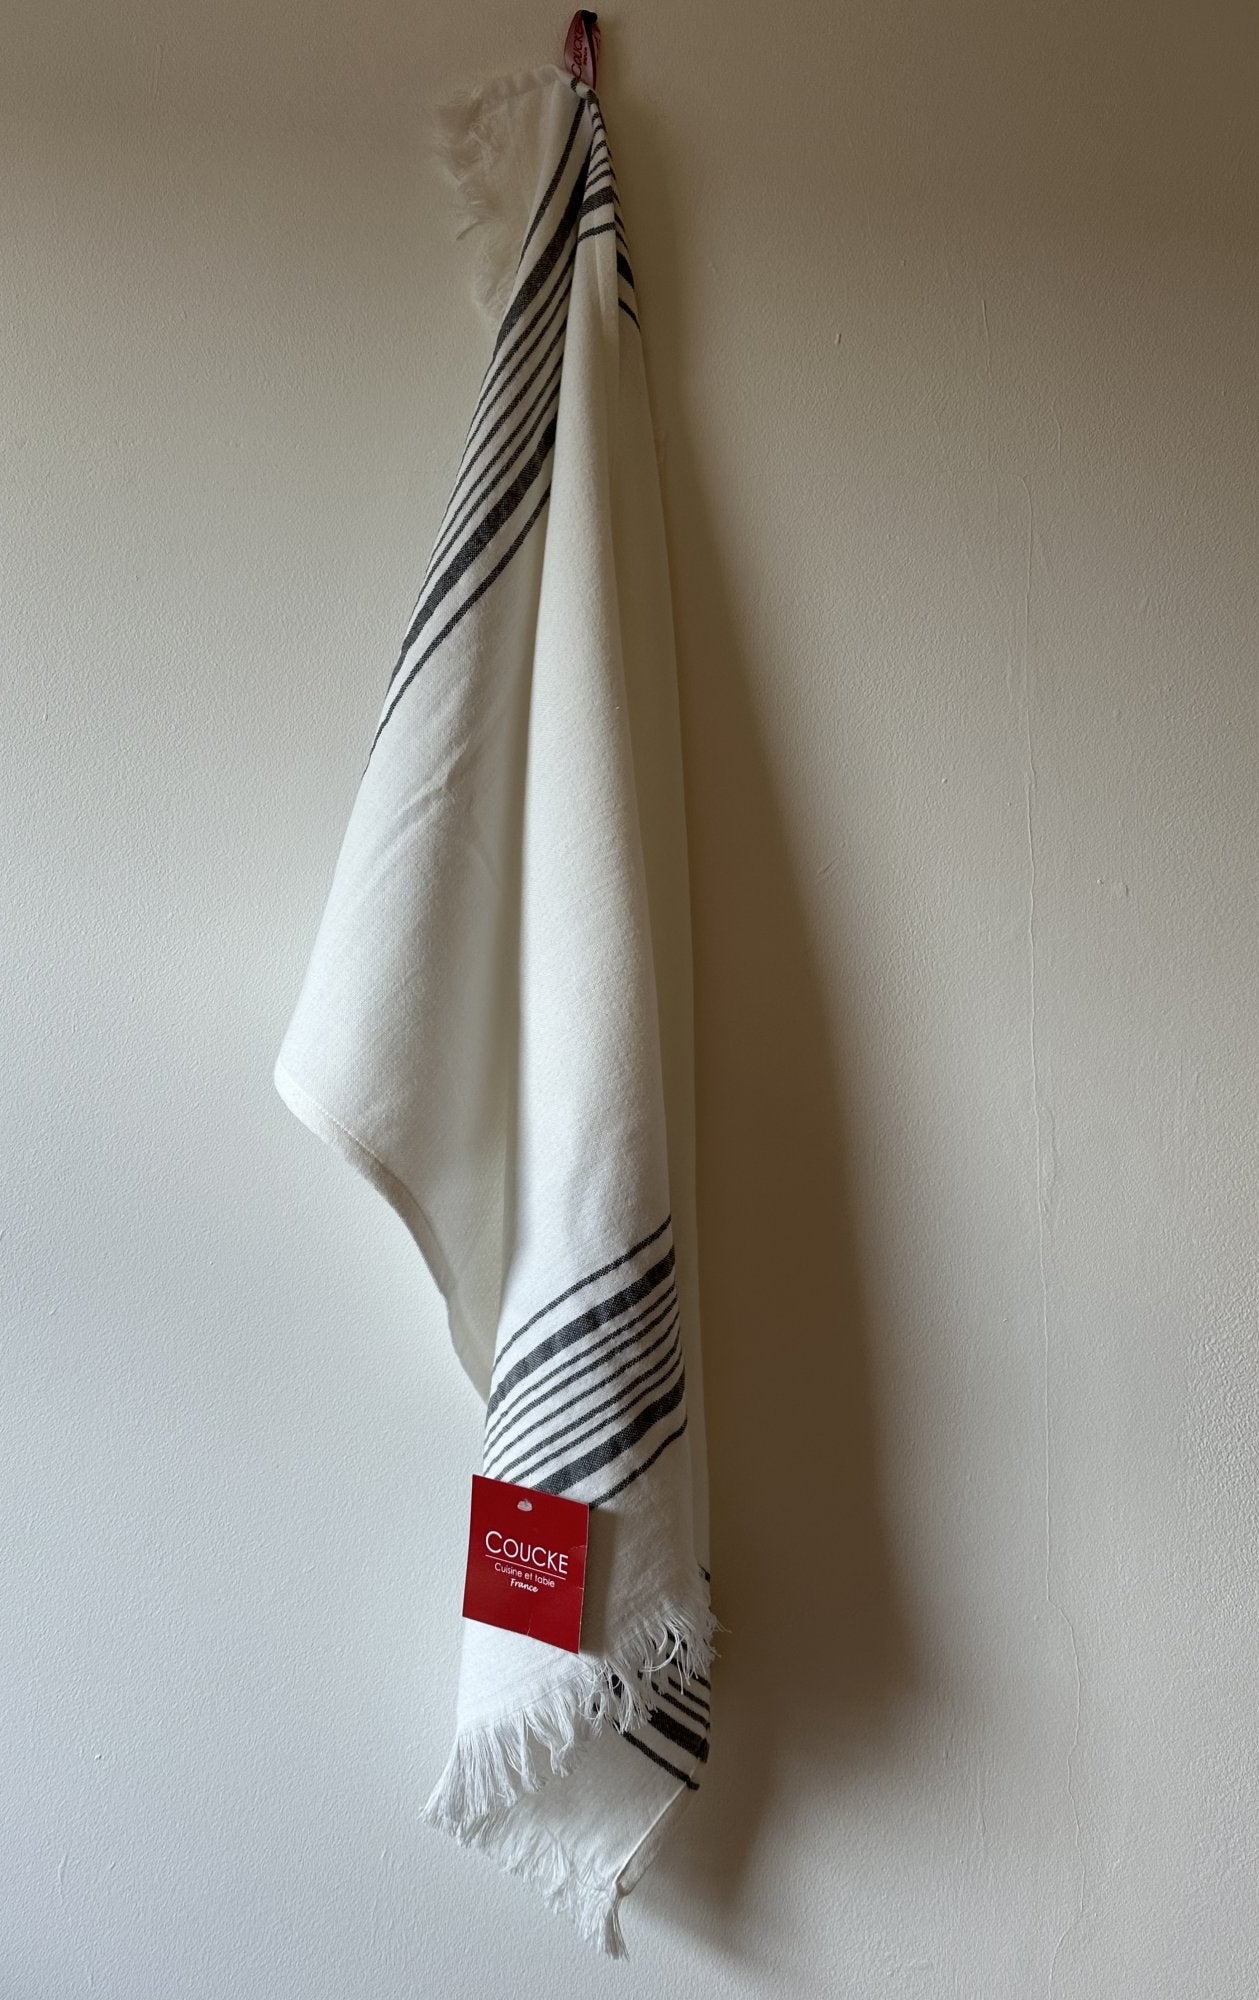 Coucke "Bise Anthracite", Woven cotton tea towel. Designed in France.